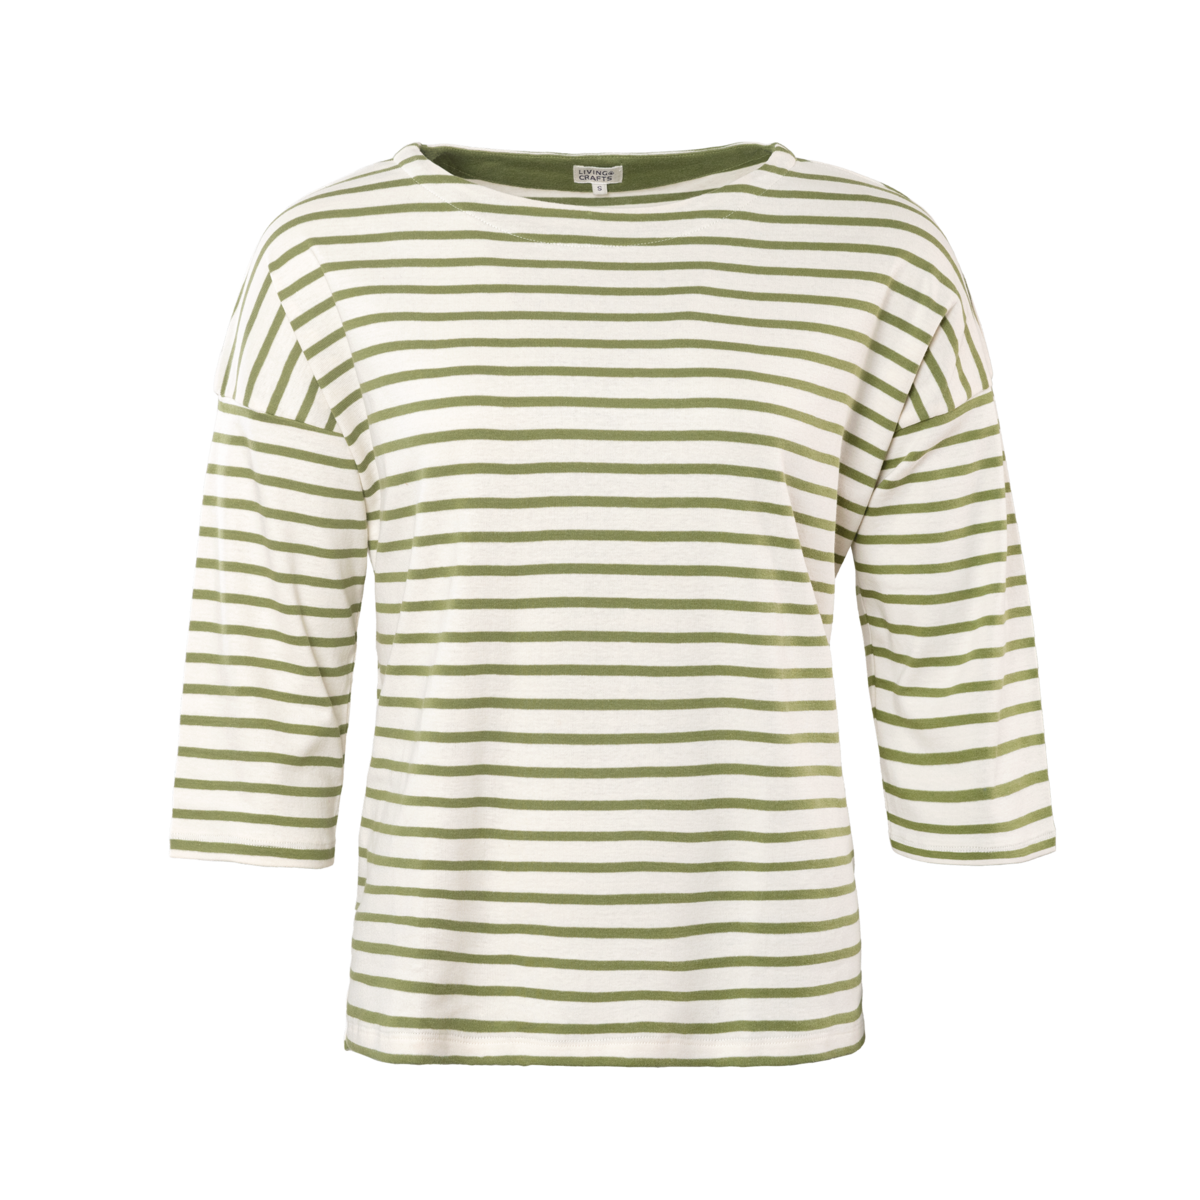 Striped Shirt, OMBRA